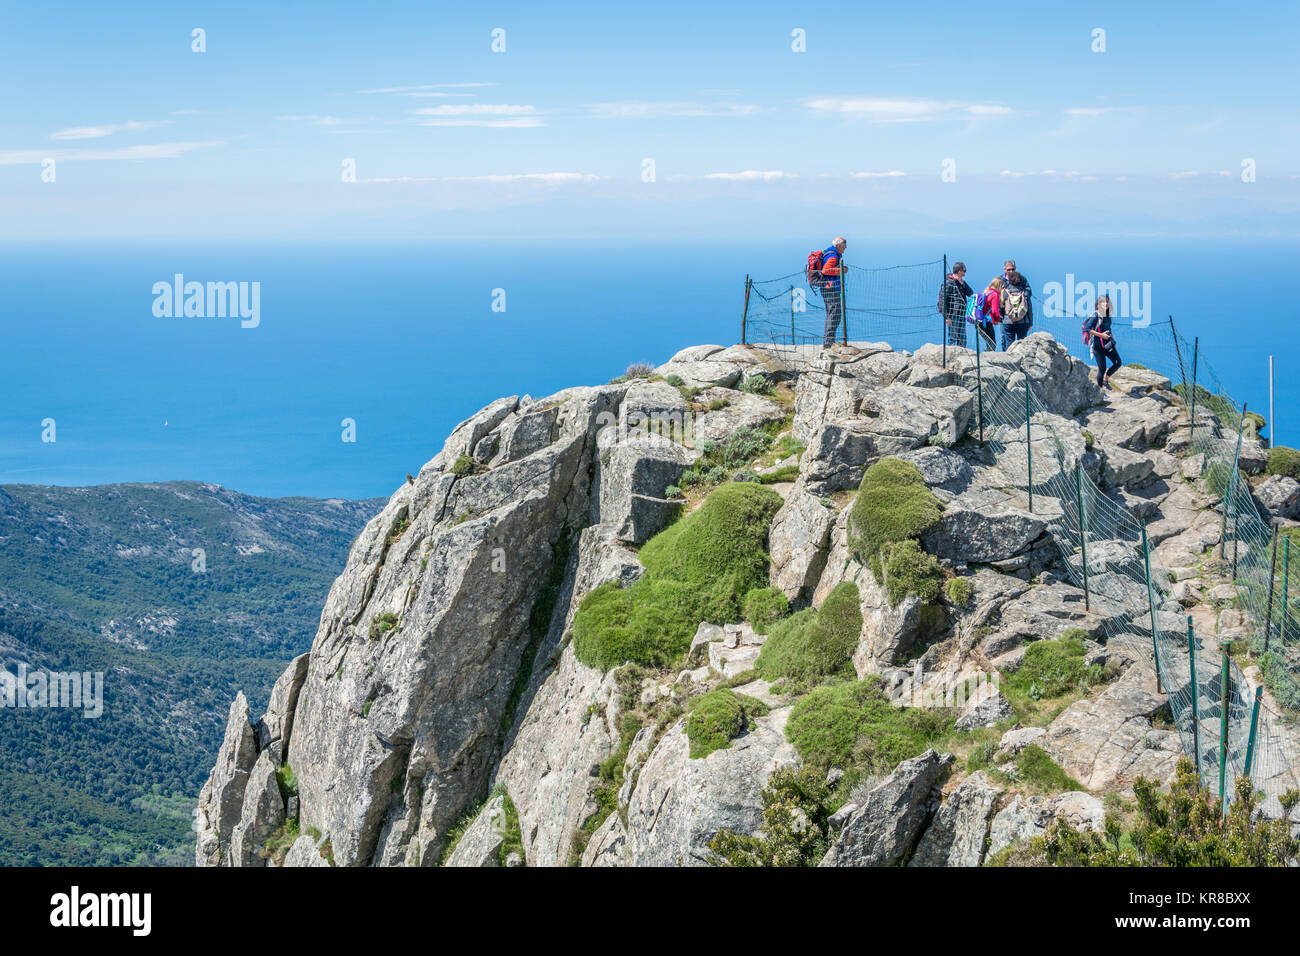 The top of Capanne Mountain in Elba Island, Tuscany. Stock Photo